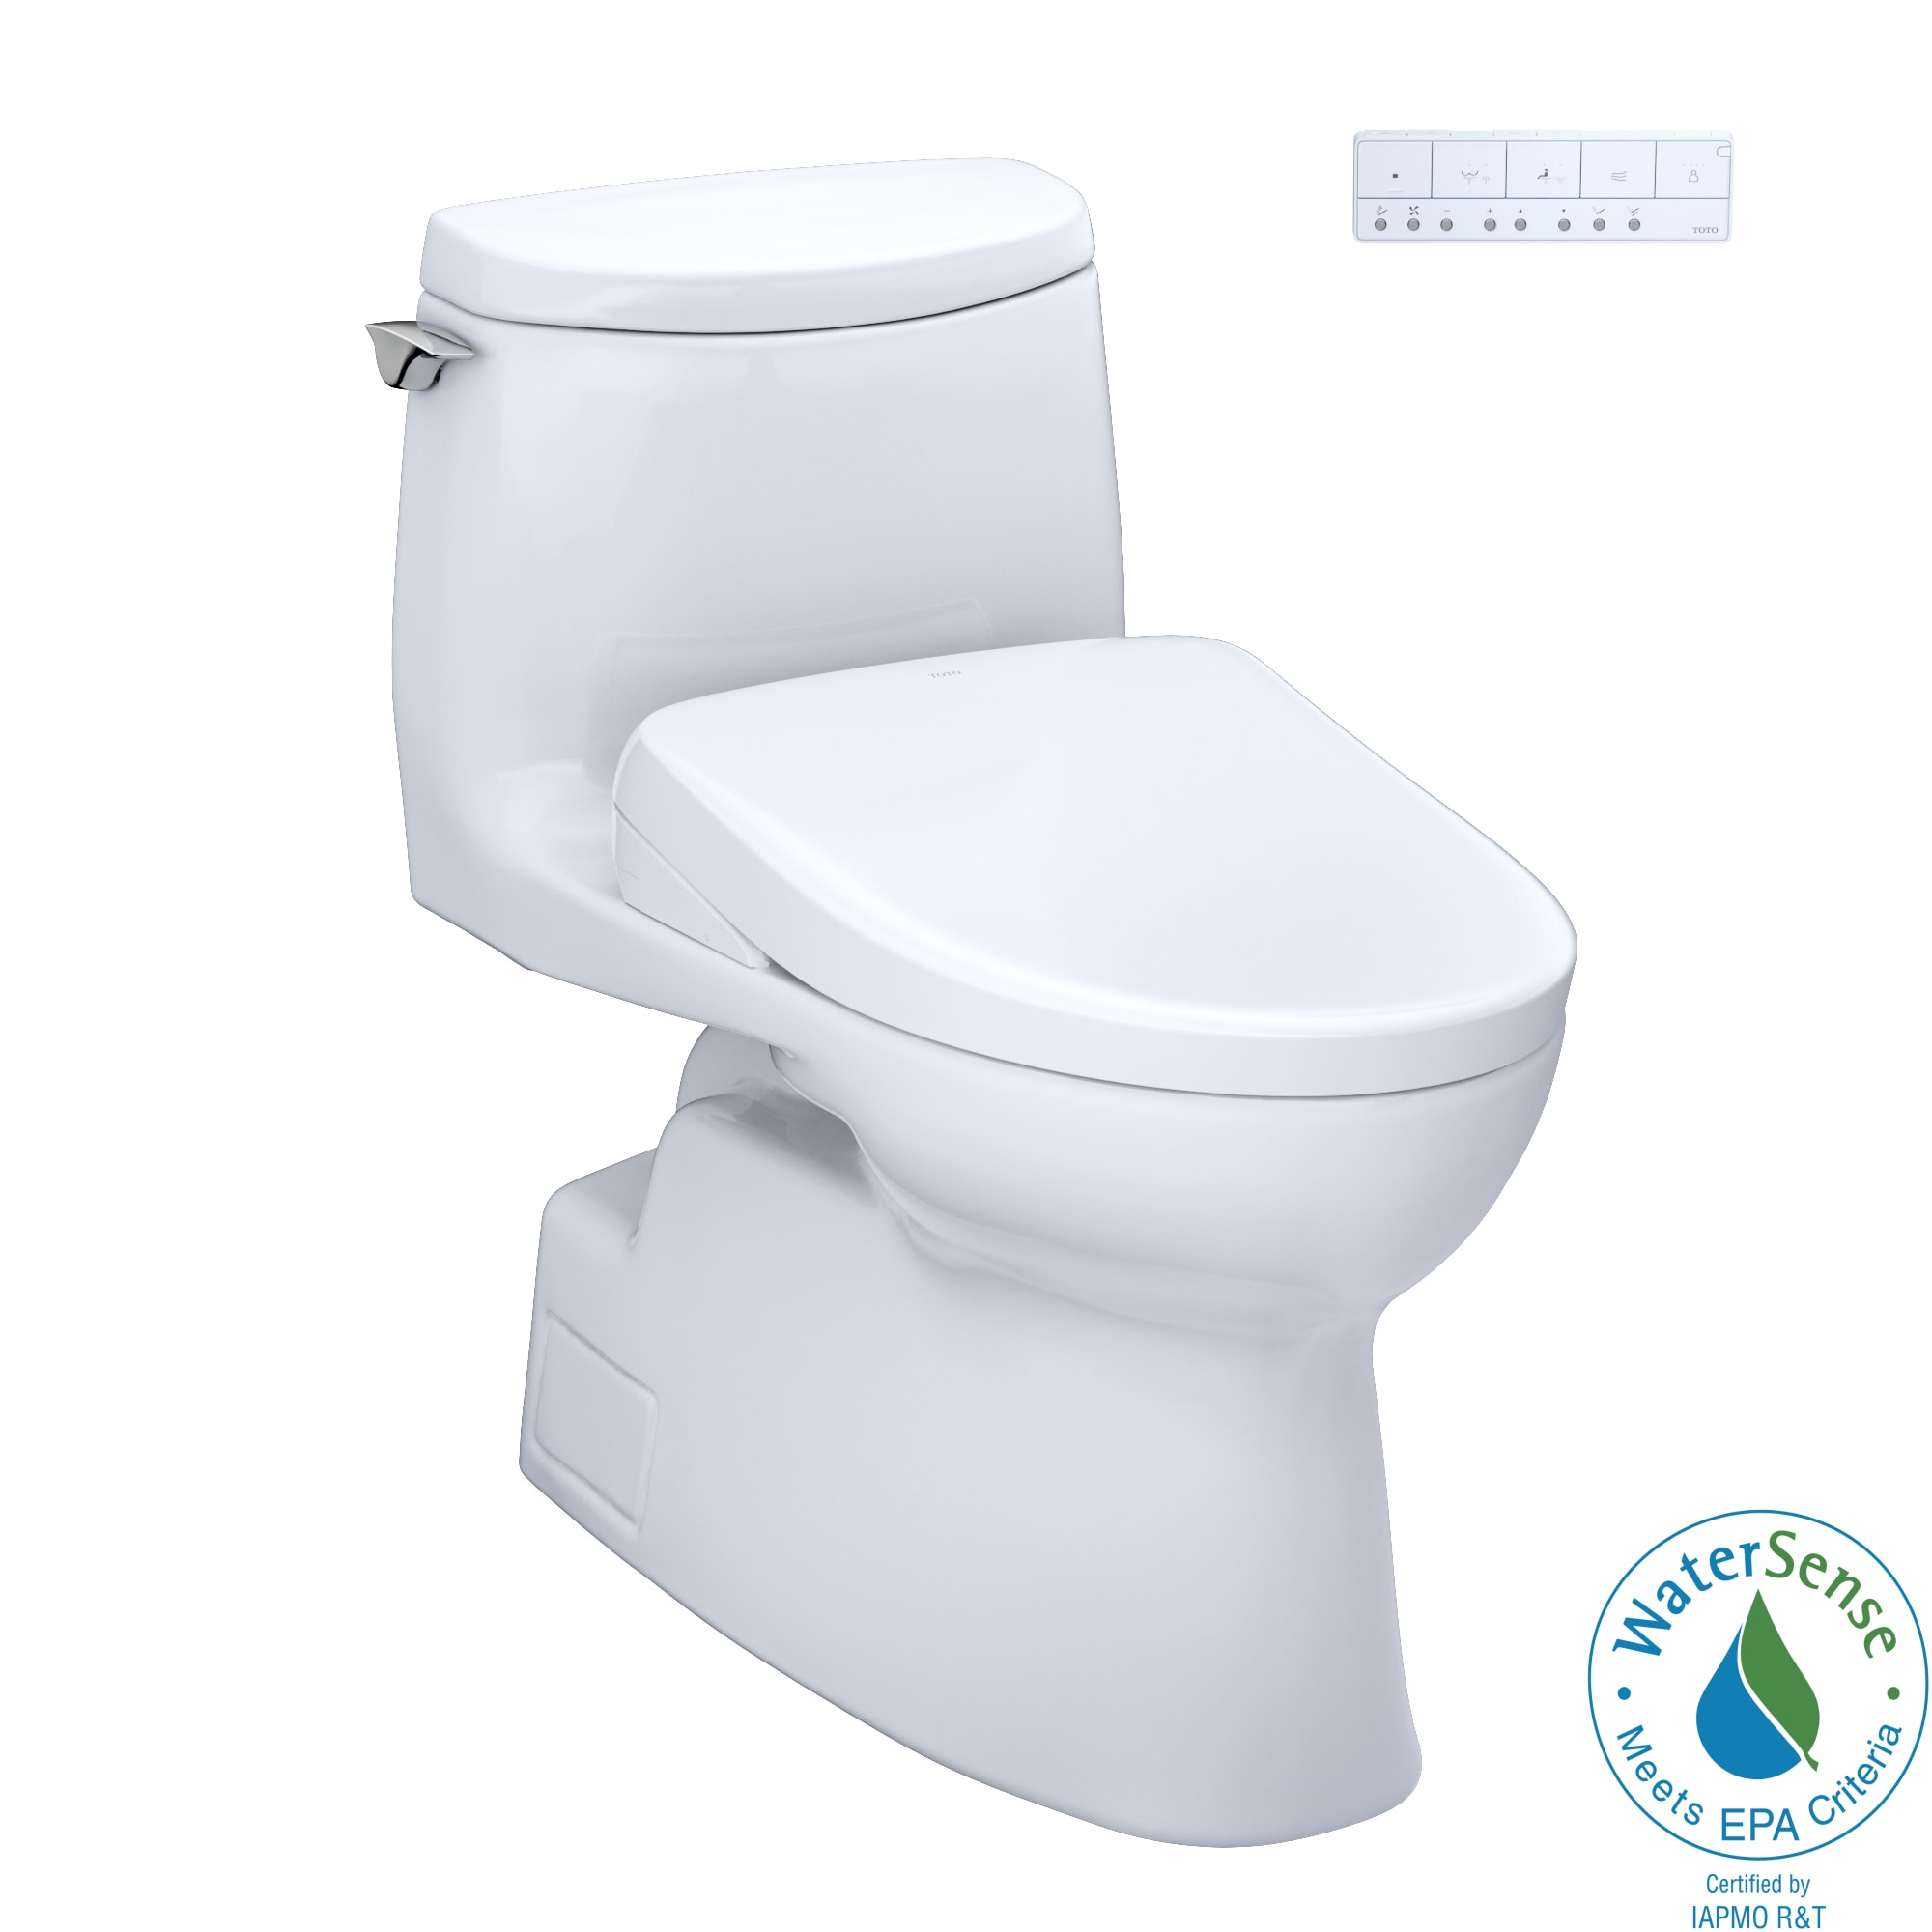 TOTO TOTO WASHLET+ Carlyle II 1G One-Piece Elongated 1.0 GPF Toilet and WASHLET+ S7 Contemporary Bidet Seat, Cotton White - MW6144726CUFG-01 -  MW6144726CUFG#01